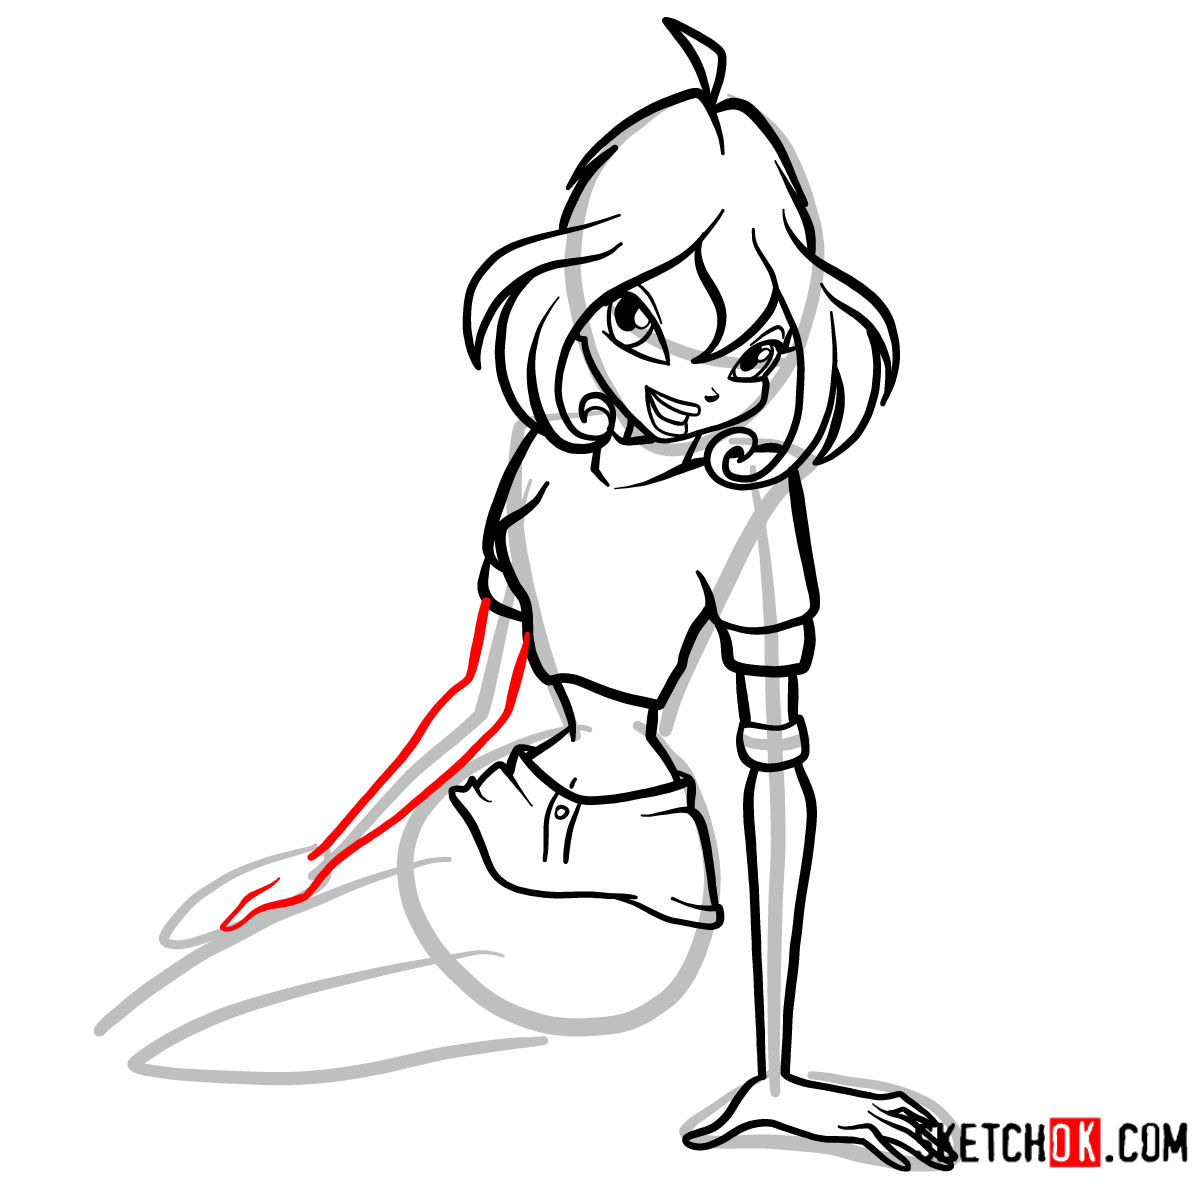 How to draw Bloom fire fairy sitting and smiling - step 08